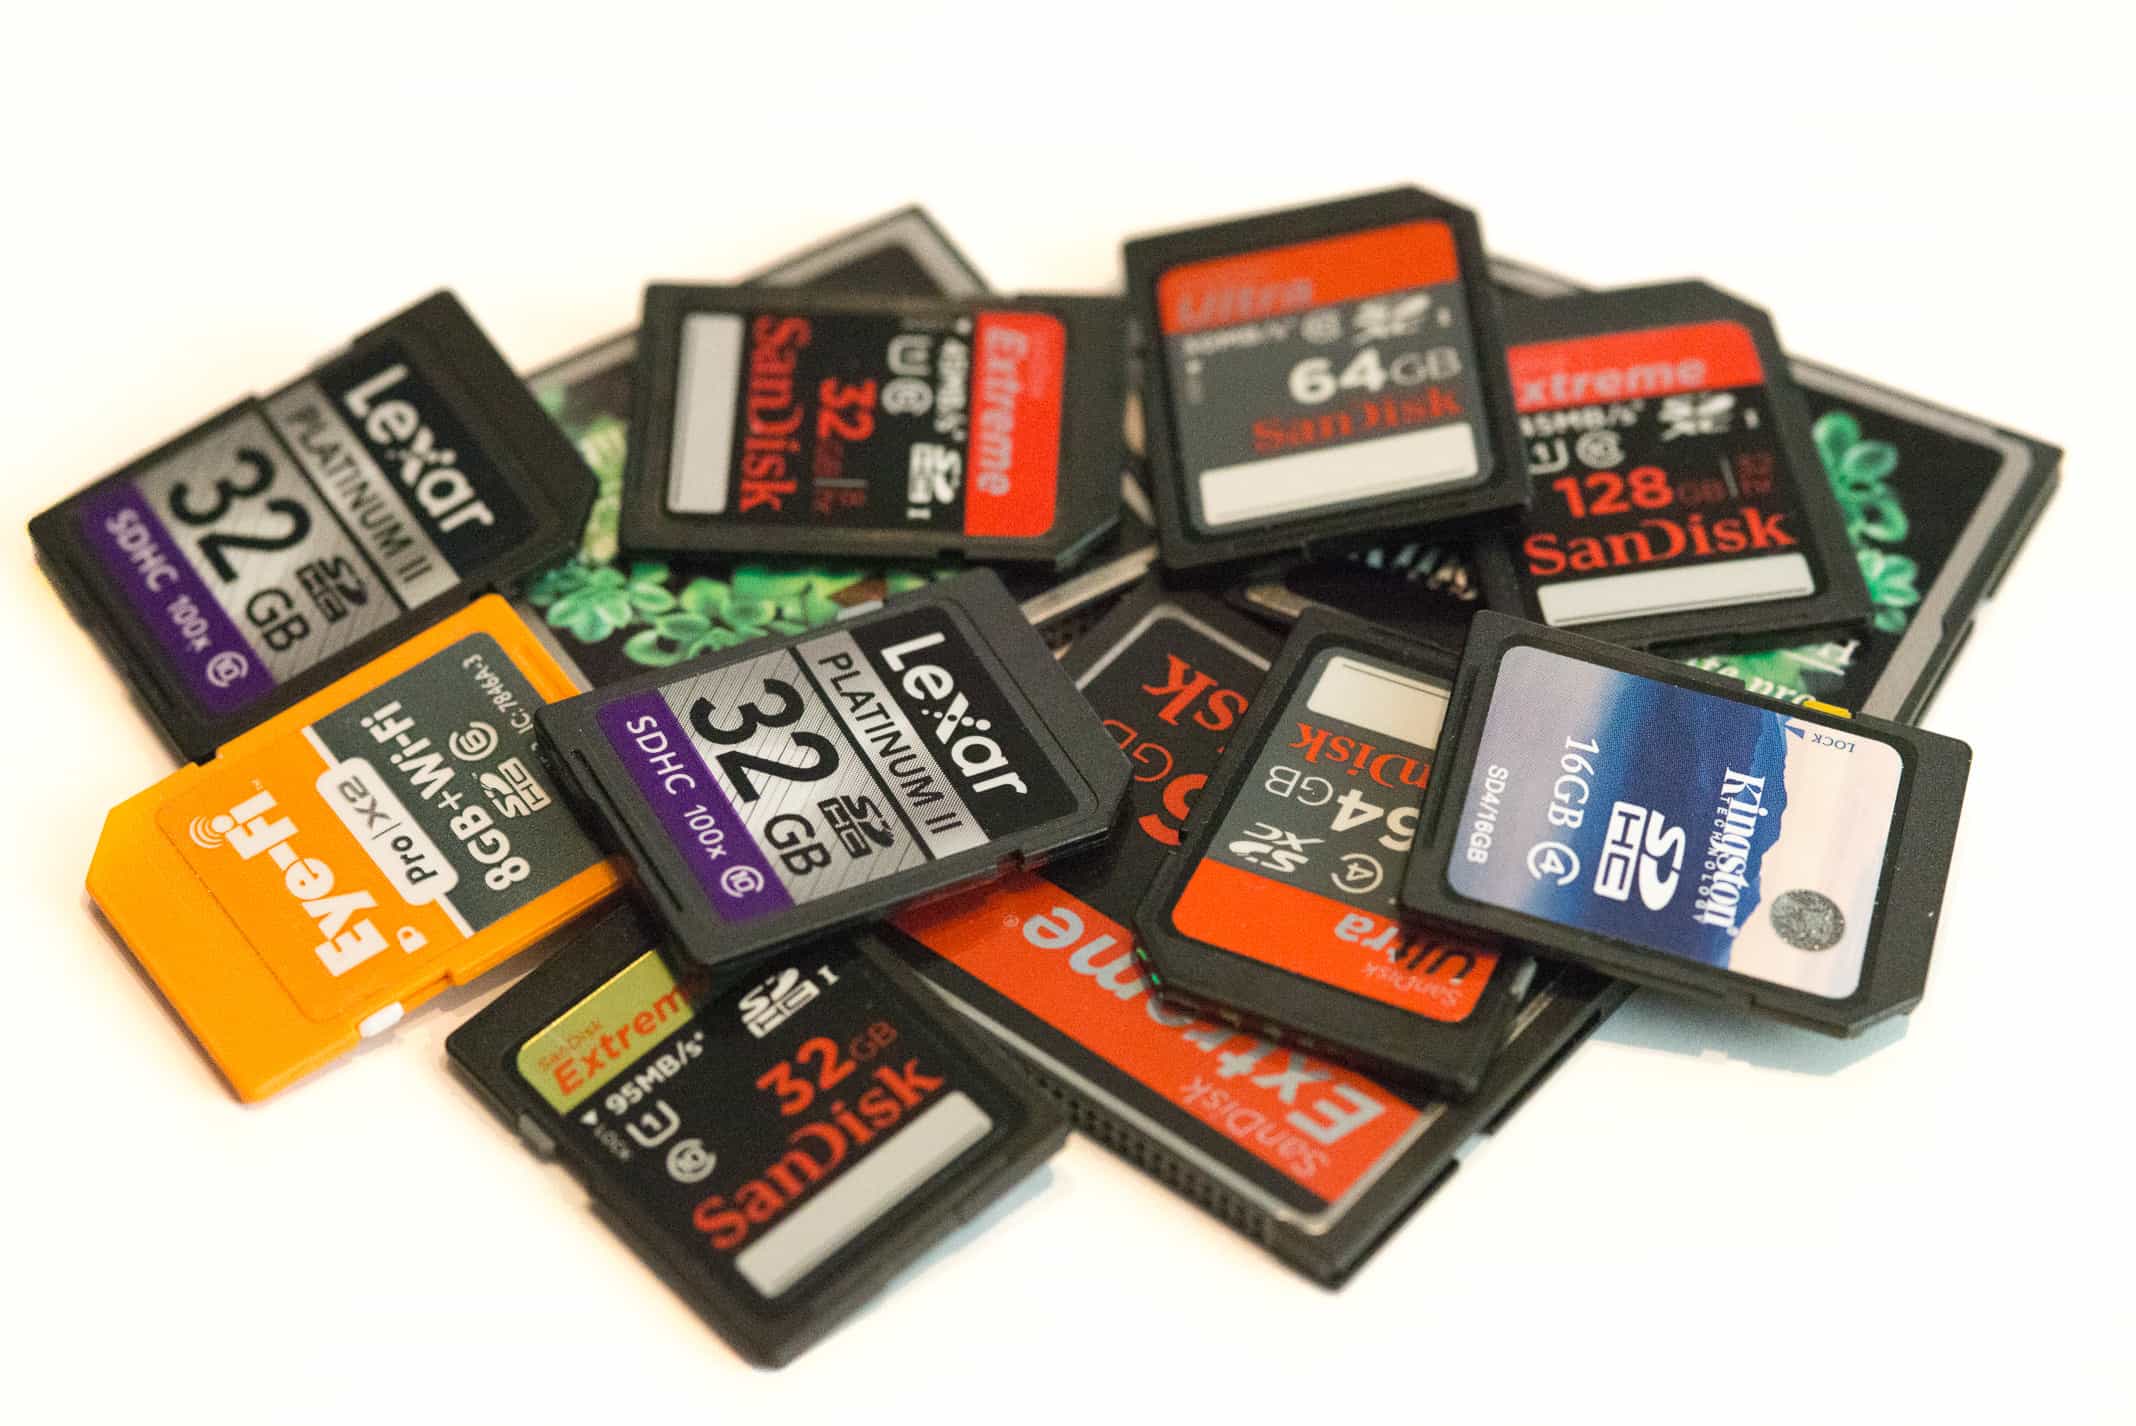 How to recover .mov files from SD card